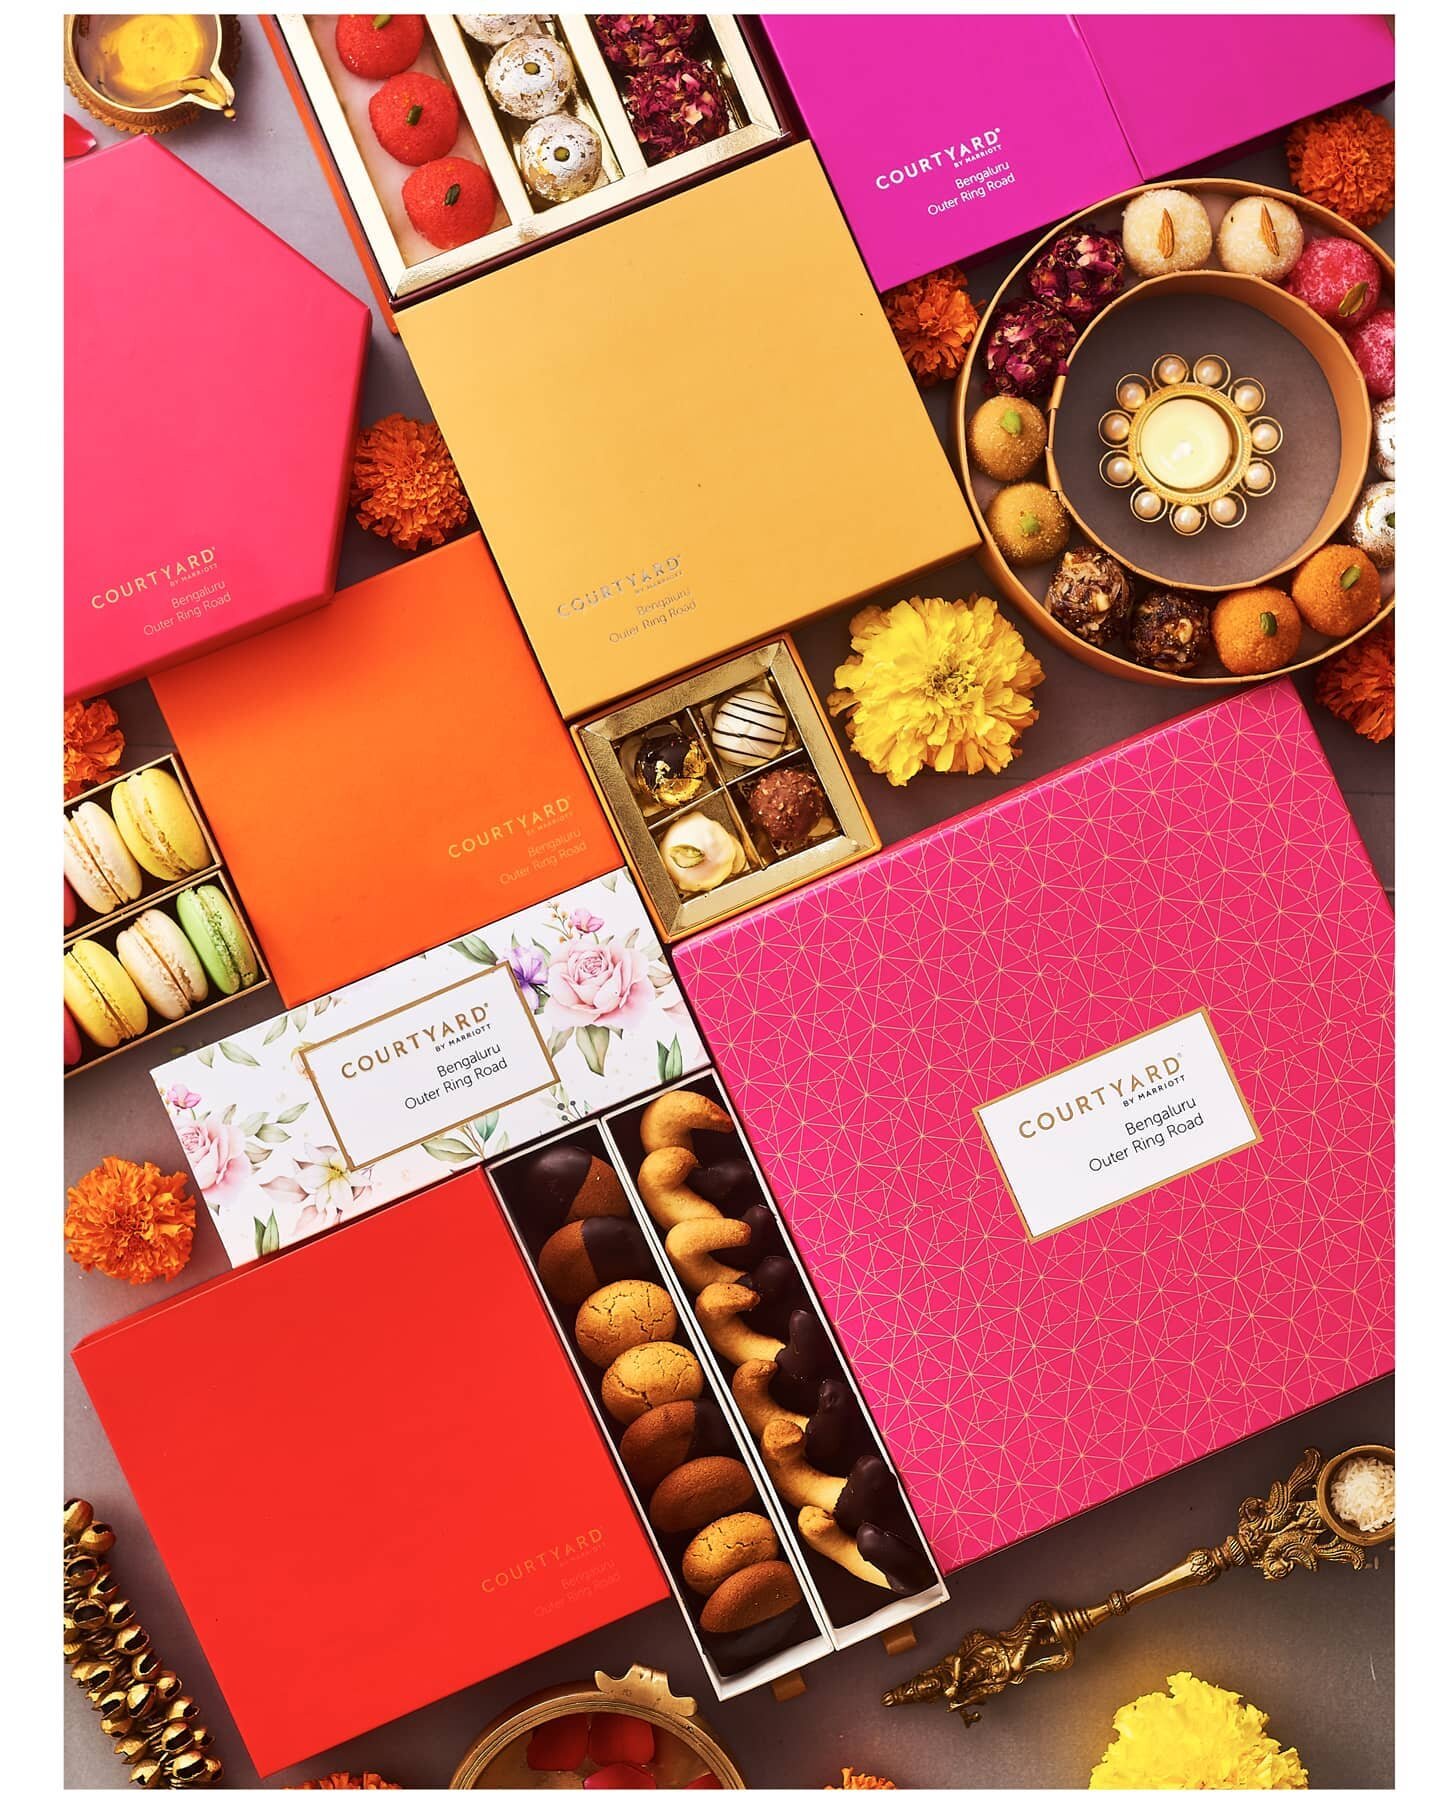 Its almost Diwali time (or maybe time to start prepping for it!) We had recieved an email from Courtyard by Marriot just a week ago to plan and shoot a diwali range of boxes, chocolates and sweets. In the past few days, we've created a moodboard, con